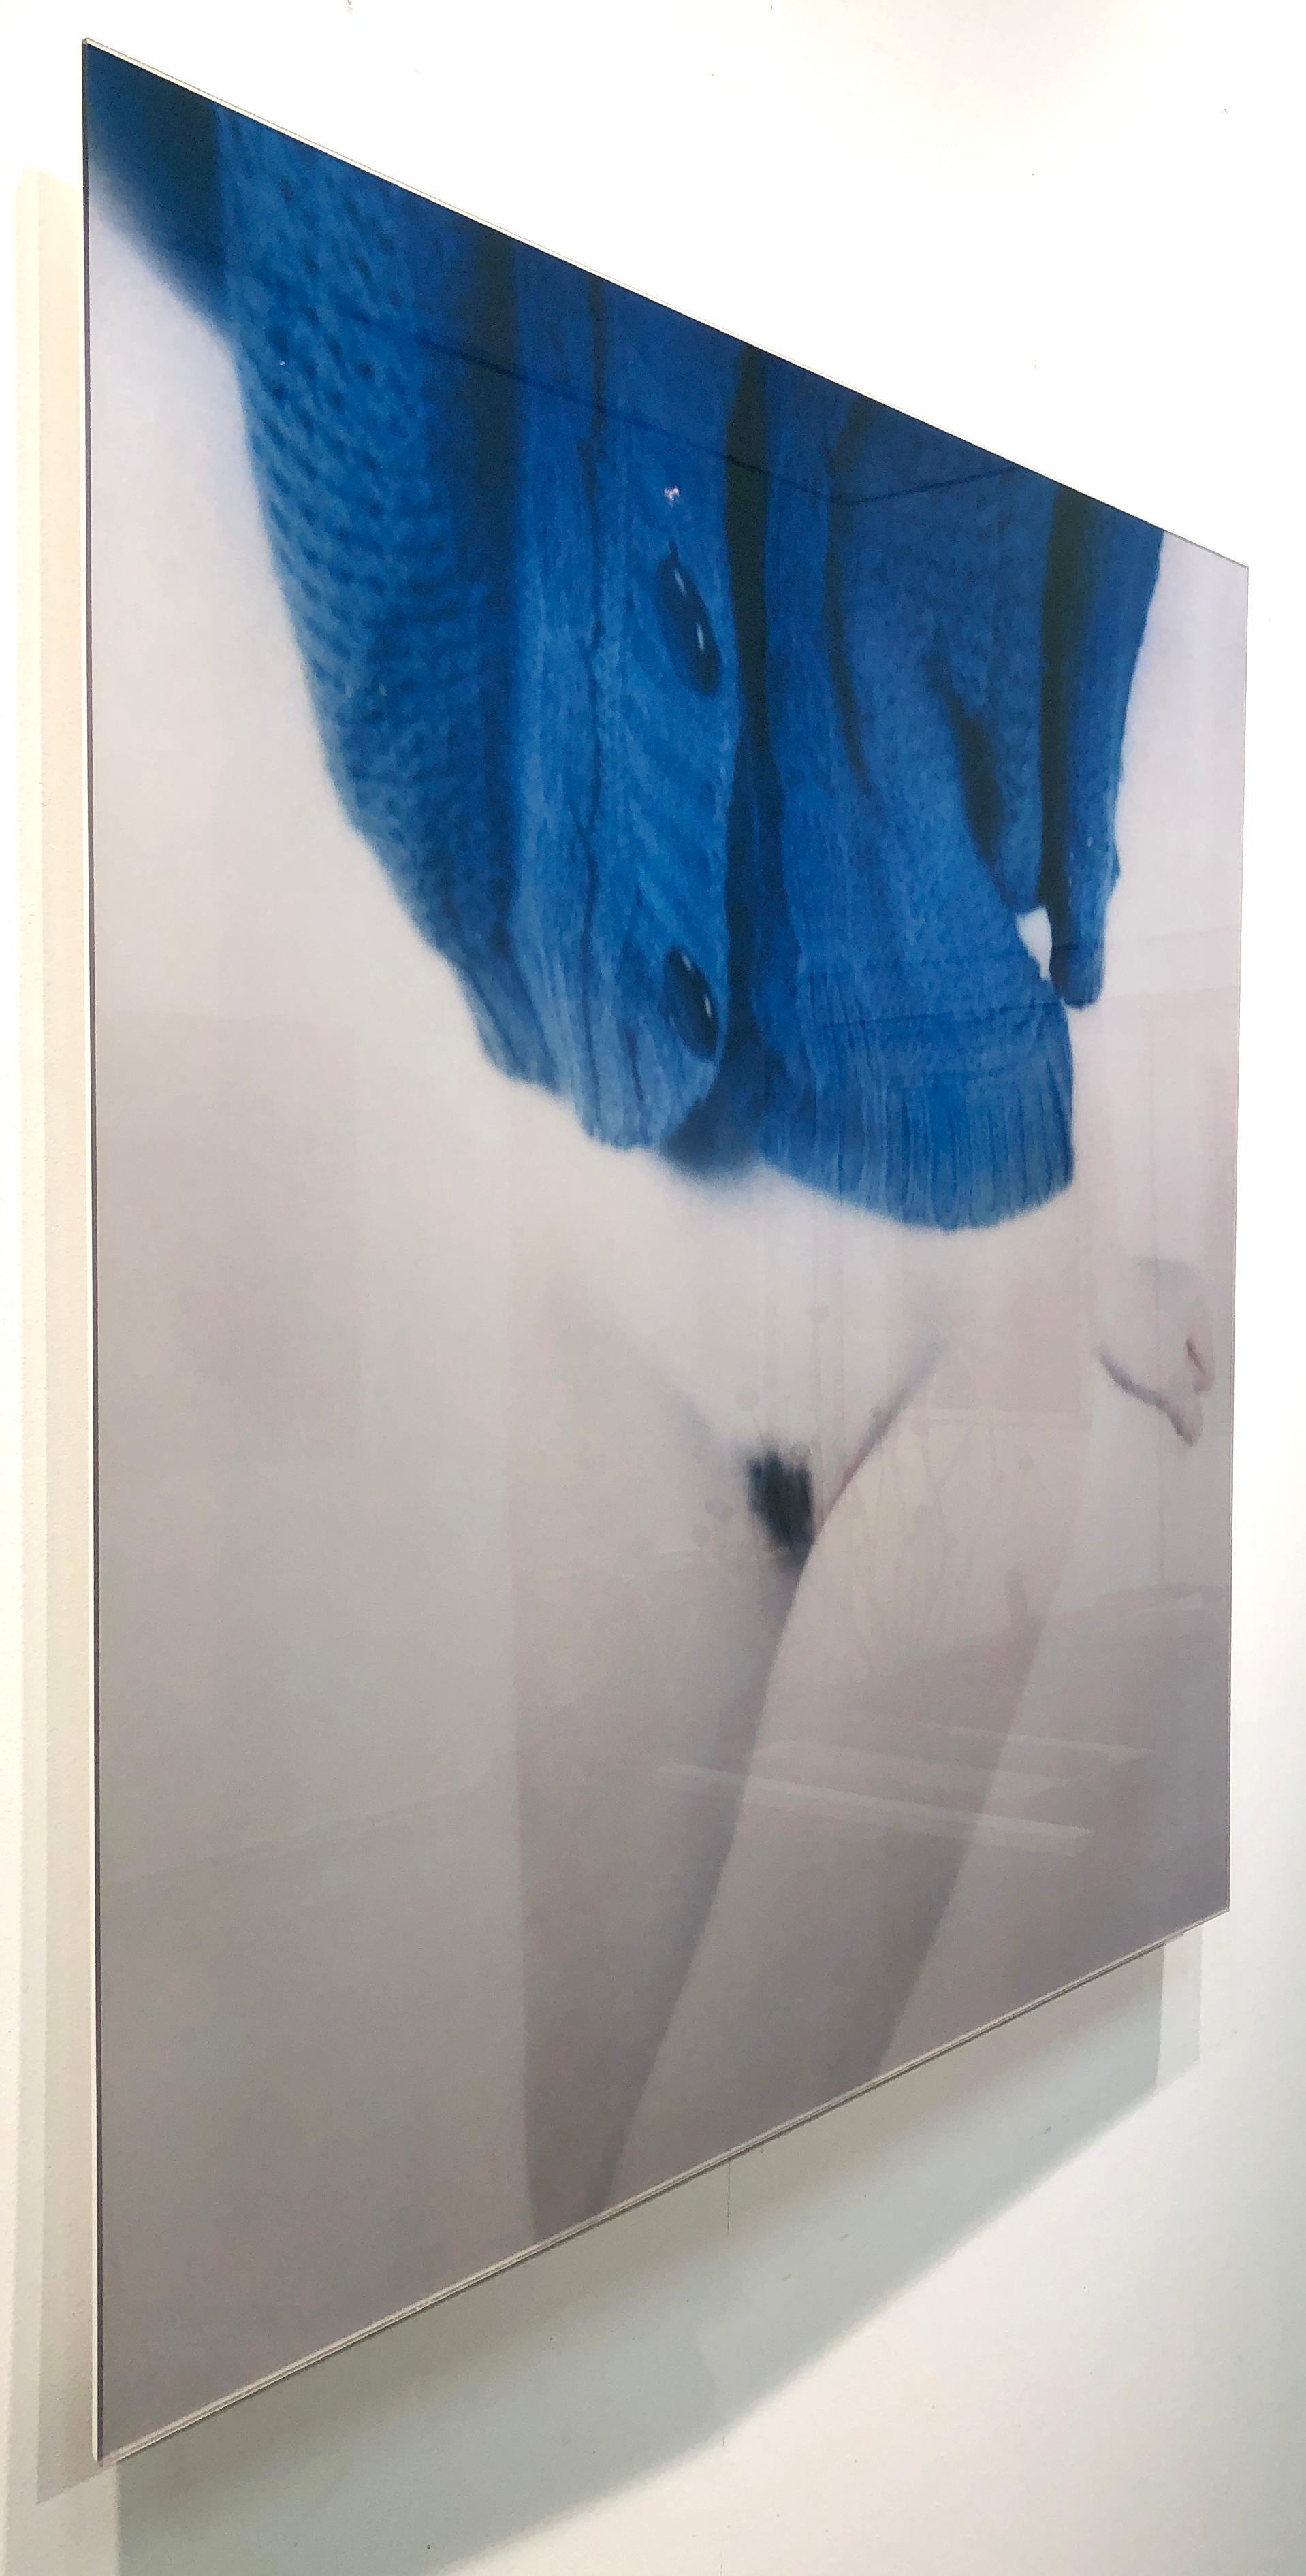 Semi Nude and Blue Knit, from the “Bright Bodies” photography series - Gray Figurative Photograph by Mira Loew